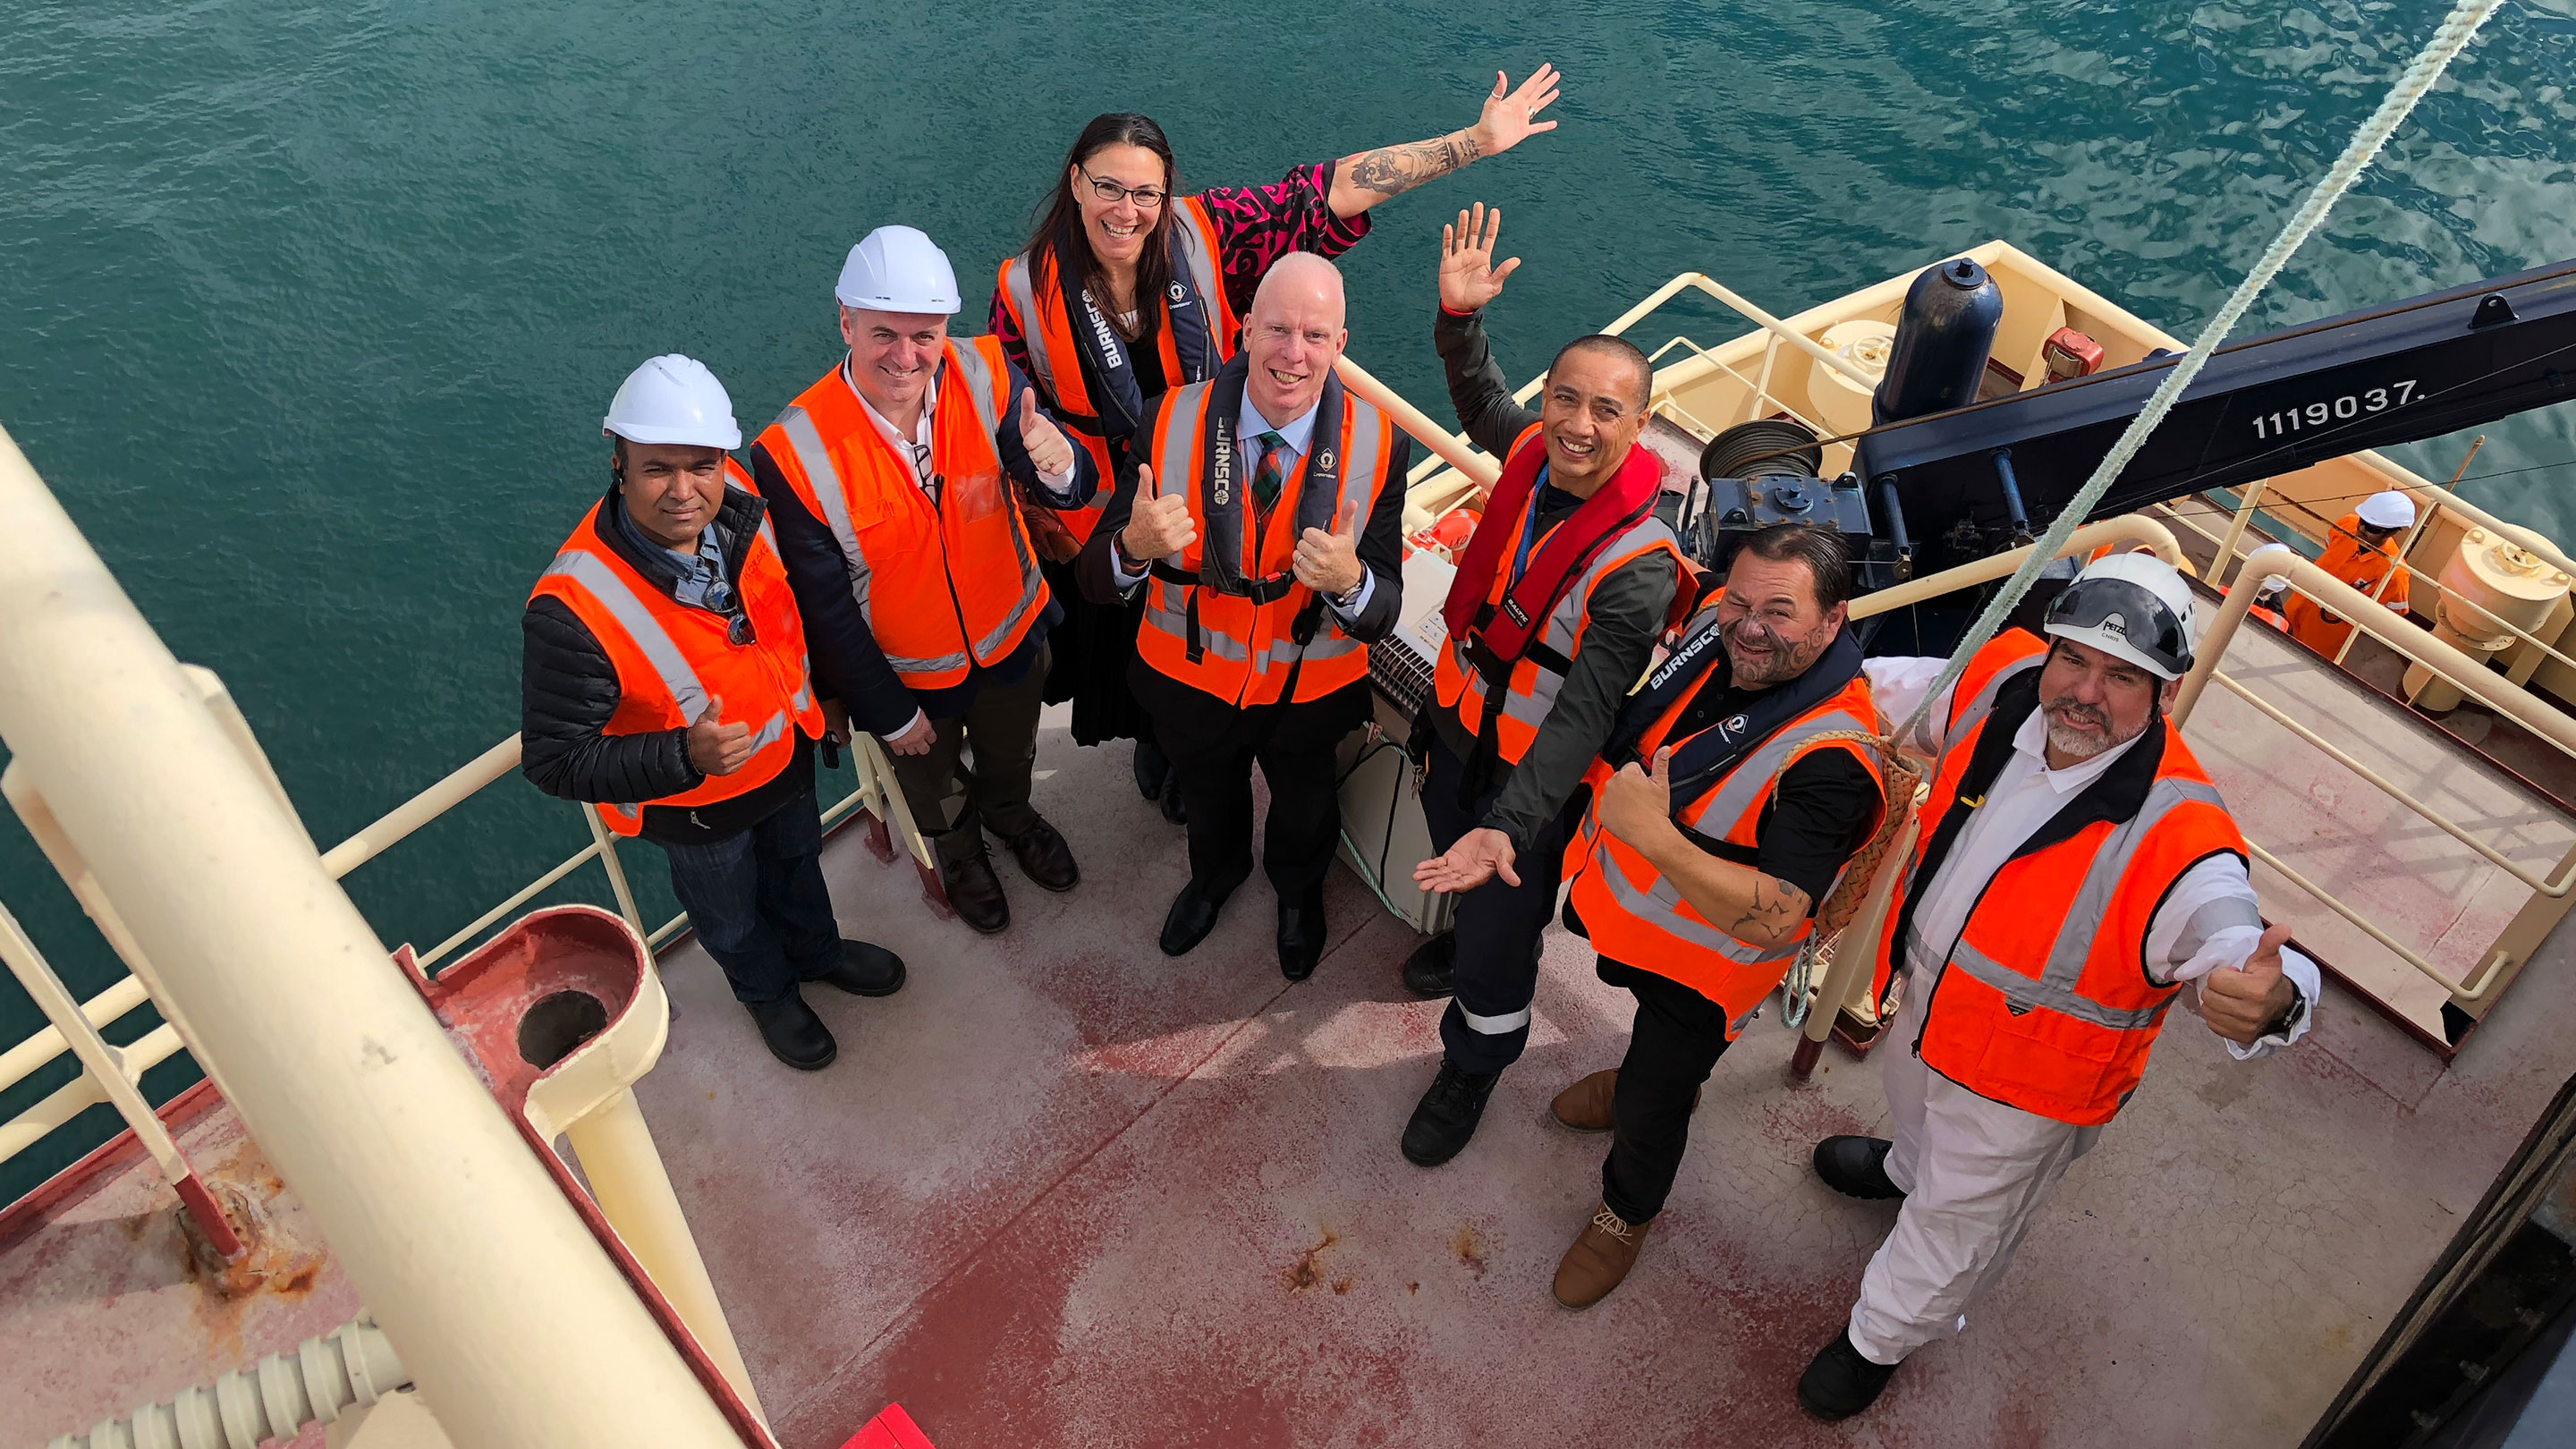 Image A traditional whakatau (welcoming ceremony) attended by Mobil staff, local dignitaries and members of local Iwi (Māori tribal groups) welcomed the MT Korimako to its new home at Tauranga Moana’s (Tauranga harbour’s) seaport on Friday 30 April